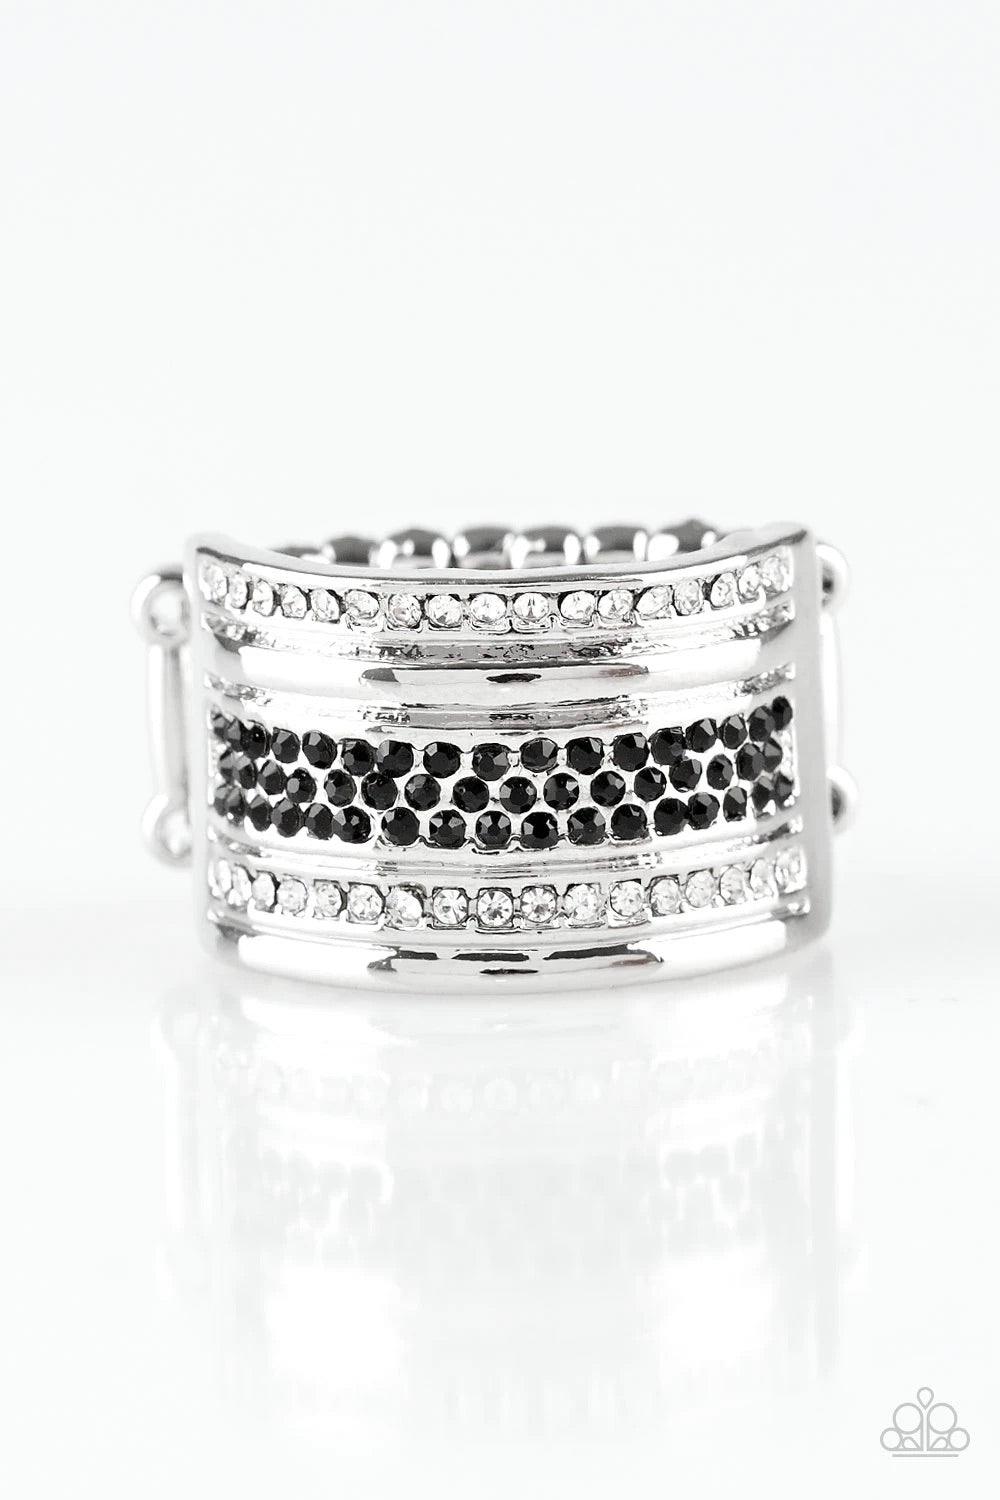 Paparazzi Accessories Top Dollar Drama - Black Black and white rhinestone encrusted bands stack across the finger for a glamorous look. Features a stretchy band for a flexible fit. Sold as one individual ring. Jewelry